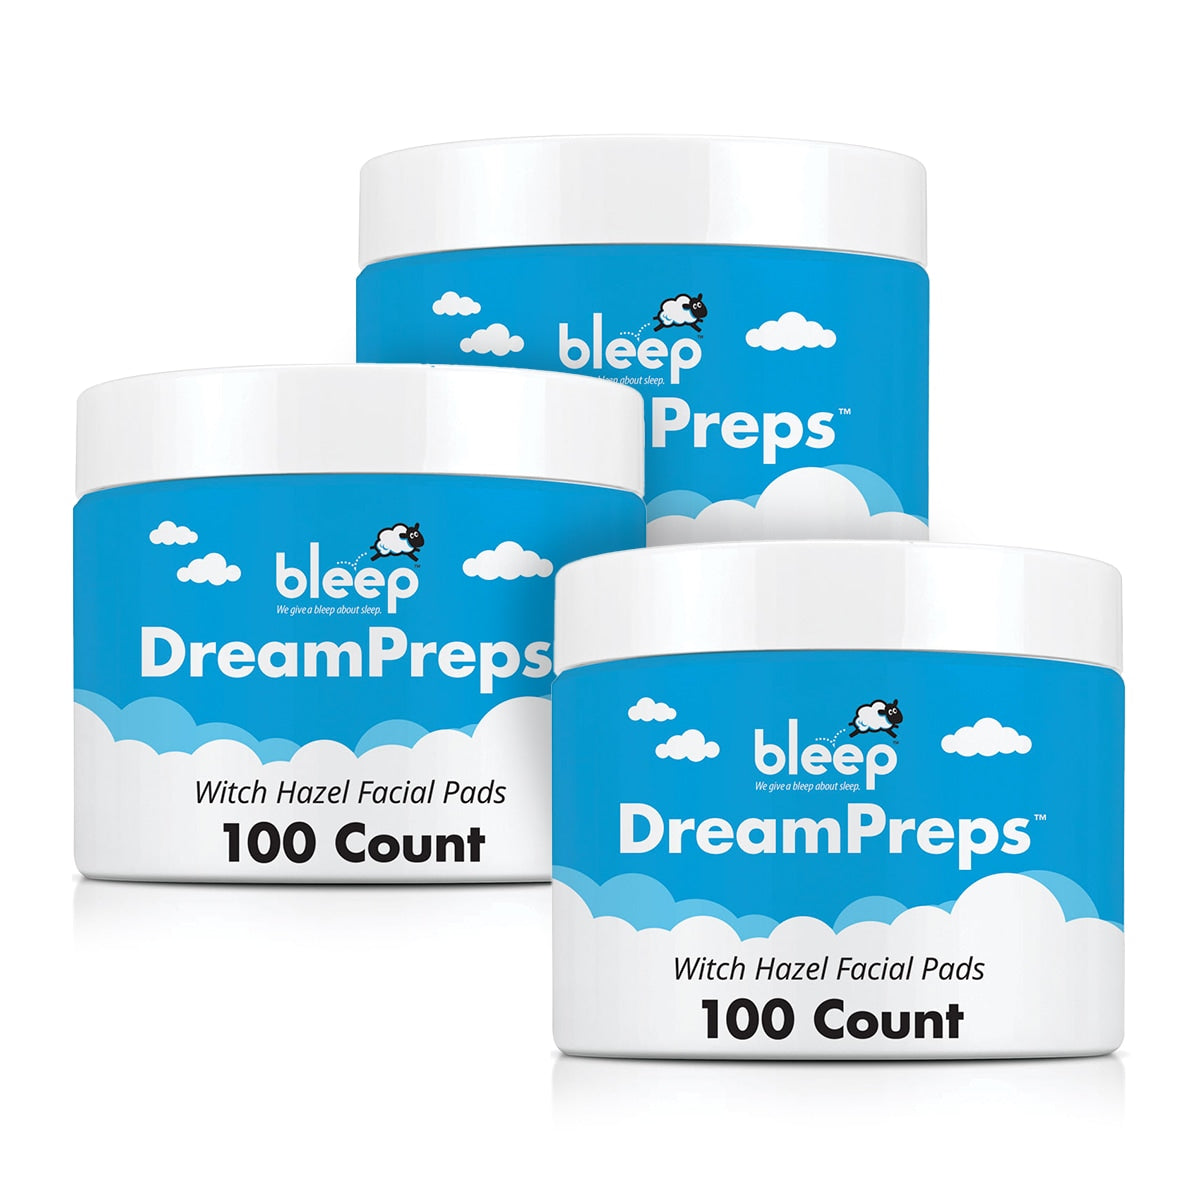 Bleep DreamPreps Facial Wipe Pads for DreamPort & Eclipse CPAP/BiPAP Masks